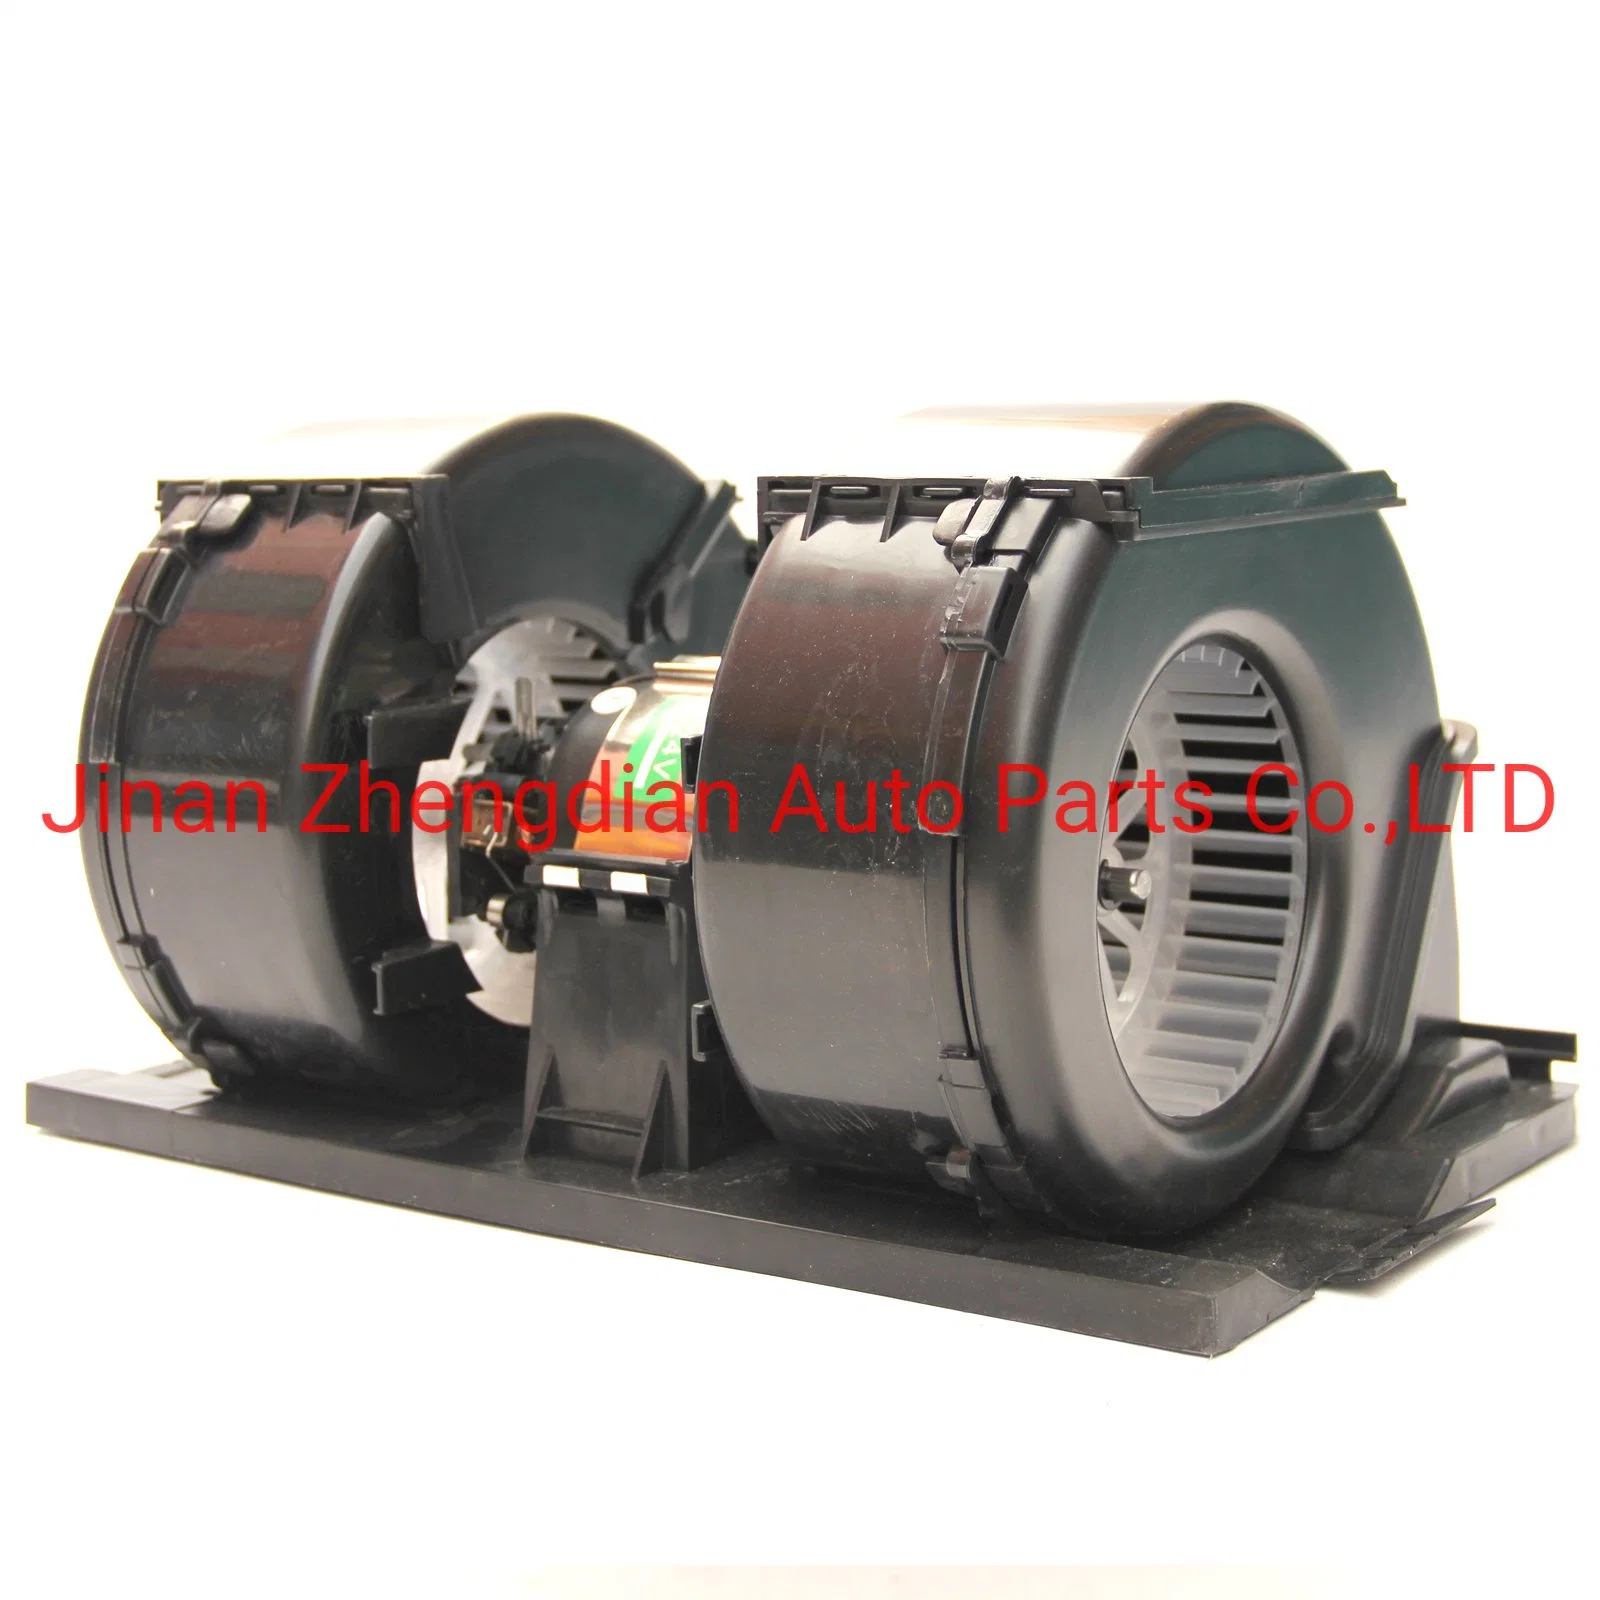 8818300002 Auto Air Conditioner Blower Motor for Beiben North Benz V3et Sinotruk HOWO Shacman FAW Foton Auman Hongyan Camc Truck Spare Parts